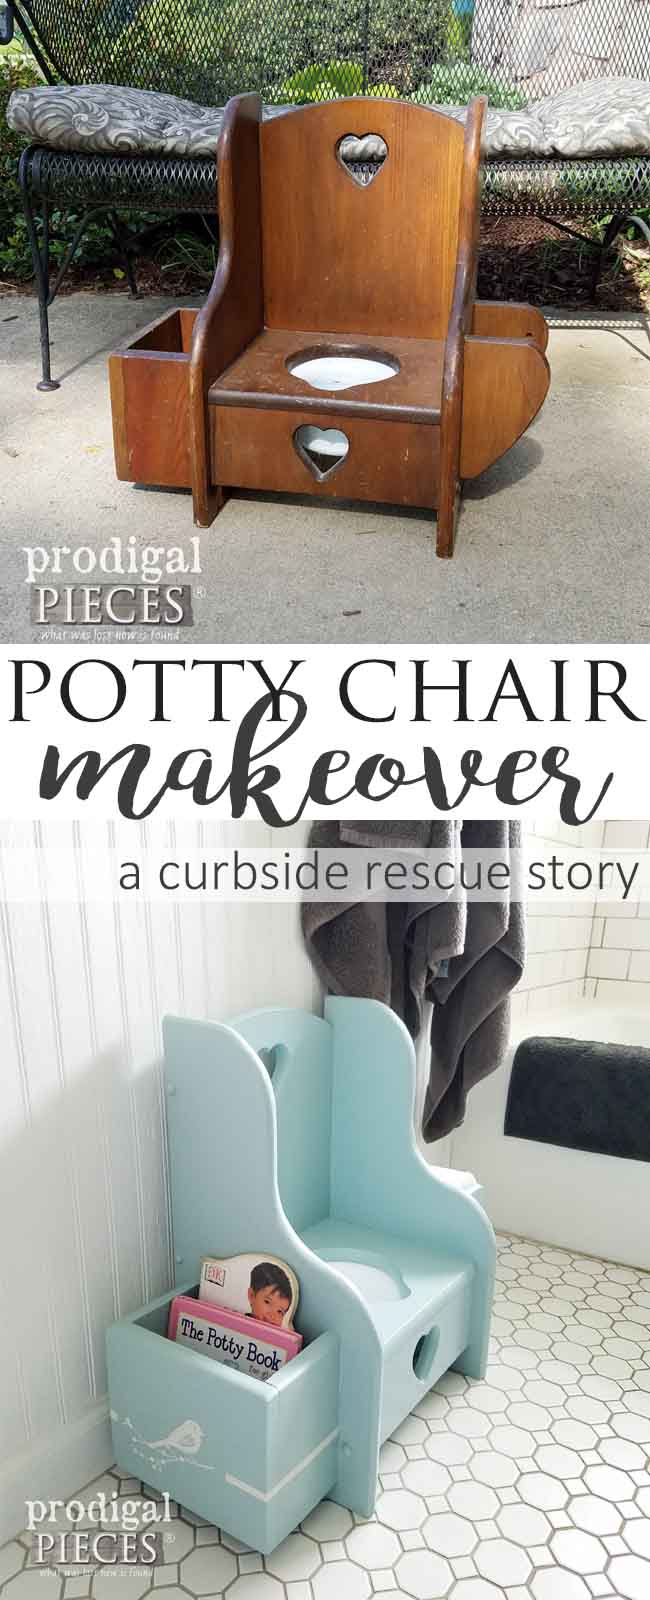 From Curbside to Trashure (one man's trash is another one's treasure), the Potty Chair Makeover is all about that cute factor. Come see how it's done at Prodigal Pieces | prodigalpieces.com